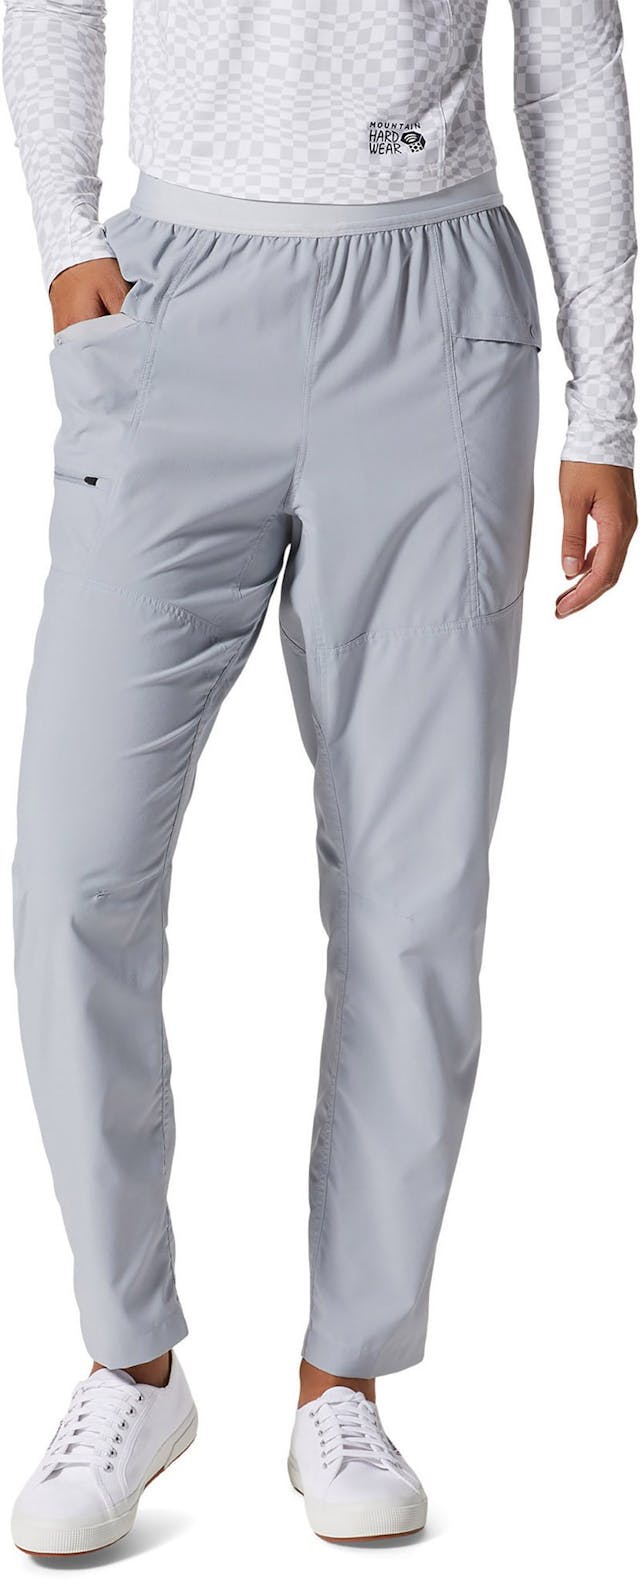 Product image for Trail Sender Pant - Women's